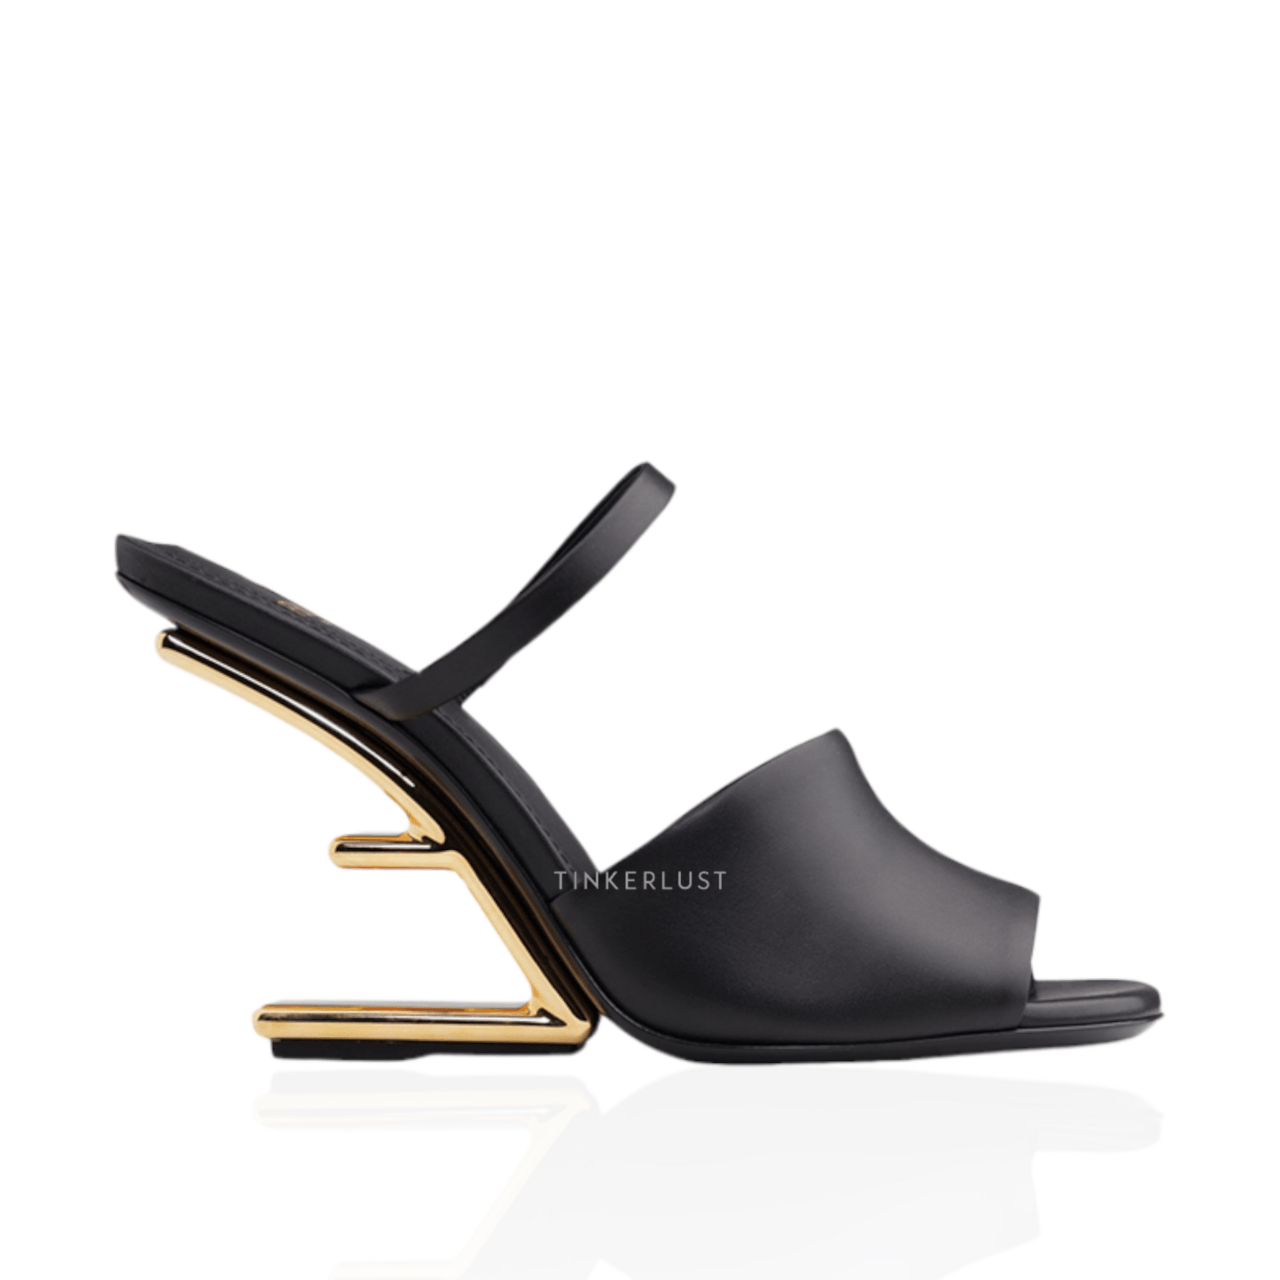 FENDI Women First Open Toe Sandals 105mm in Black Leather with Diagonal F-Shaped Heels